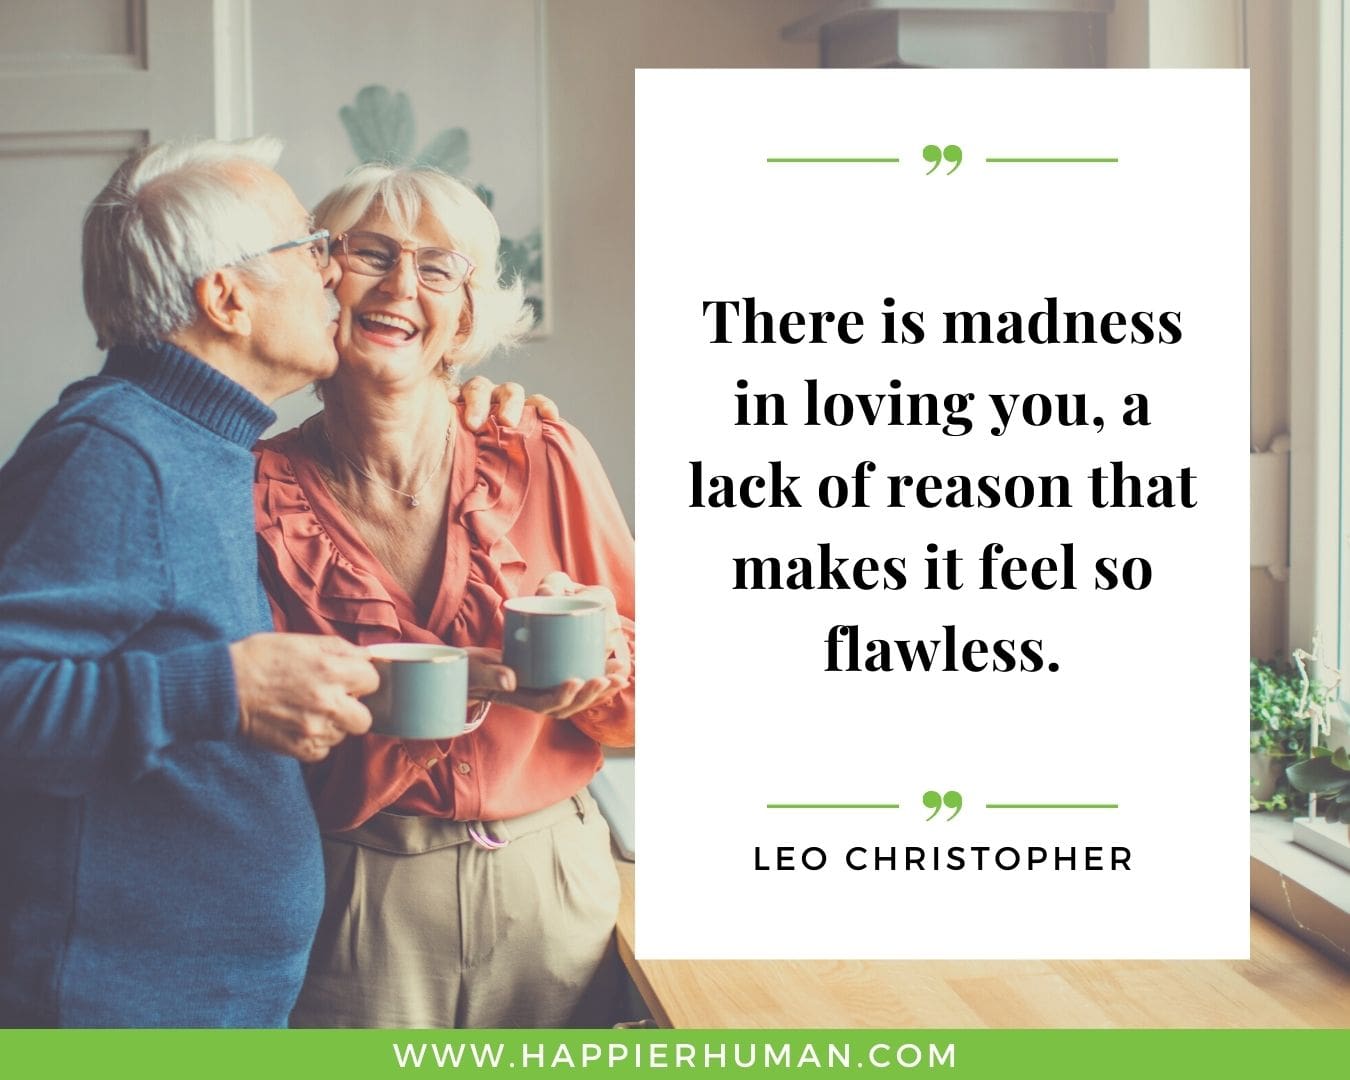 Love her madly quotes - “There is madness in loving you, a lack of reason that makes it feel so flawless. –Leo Christopher